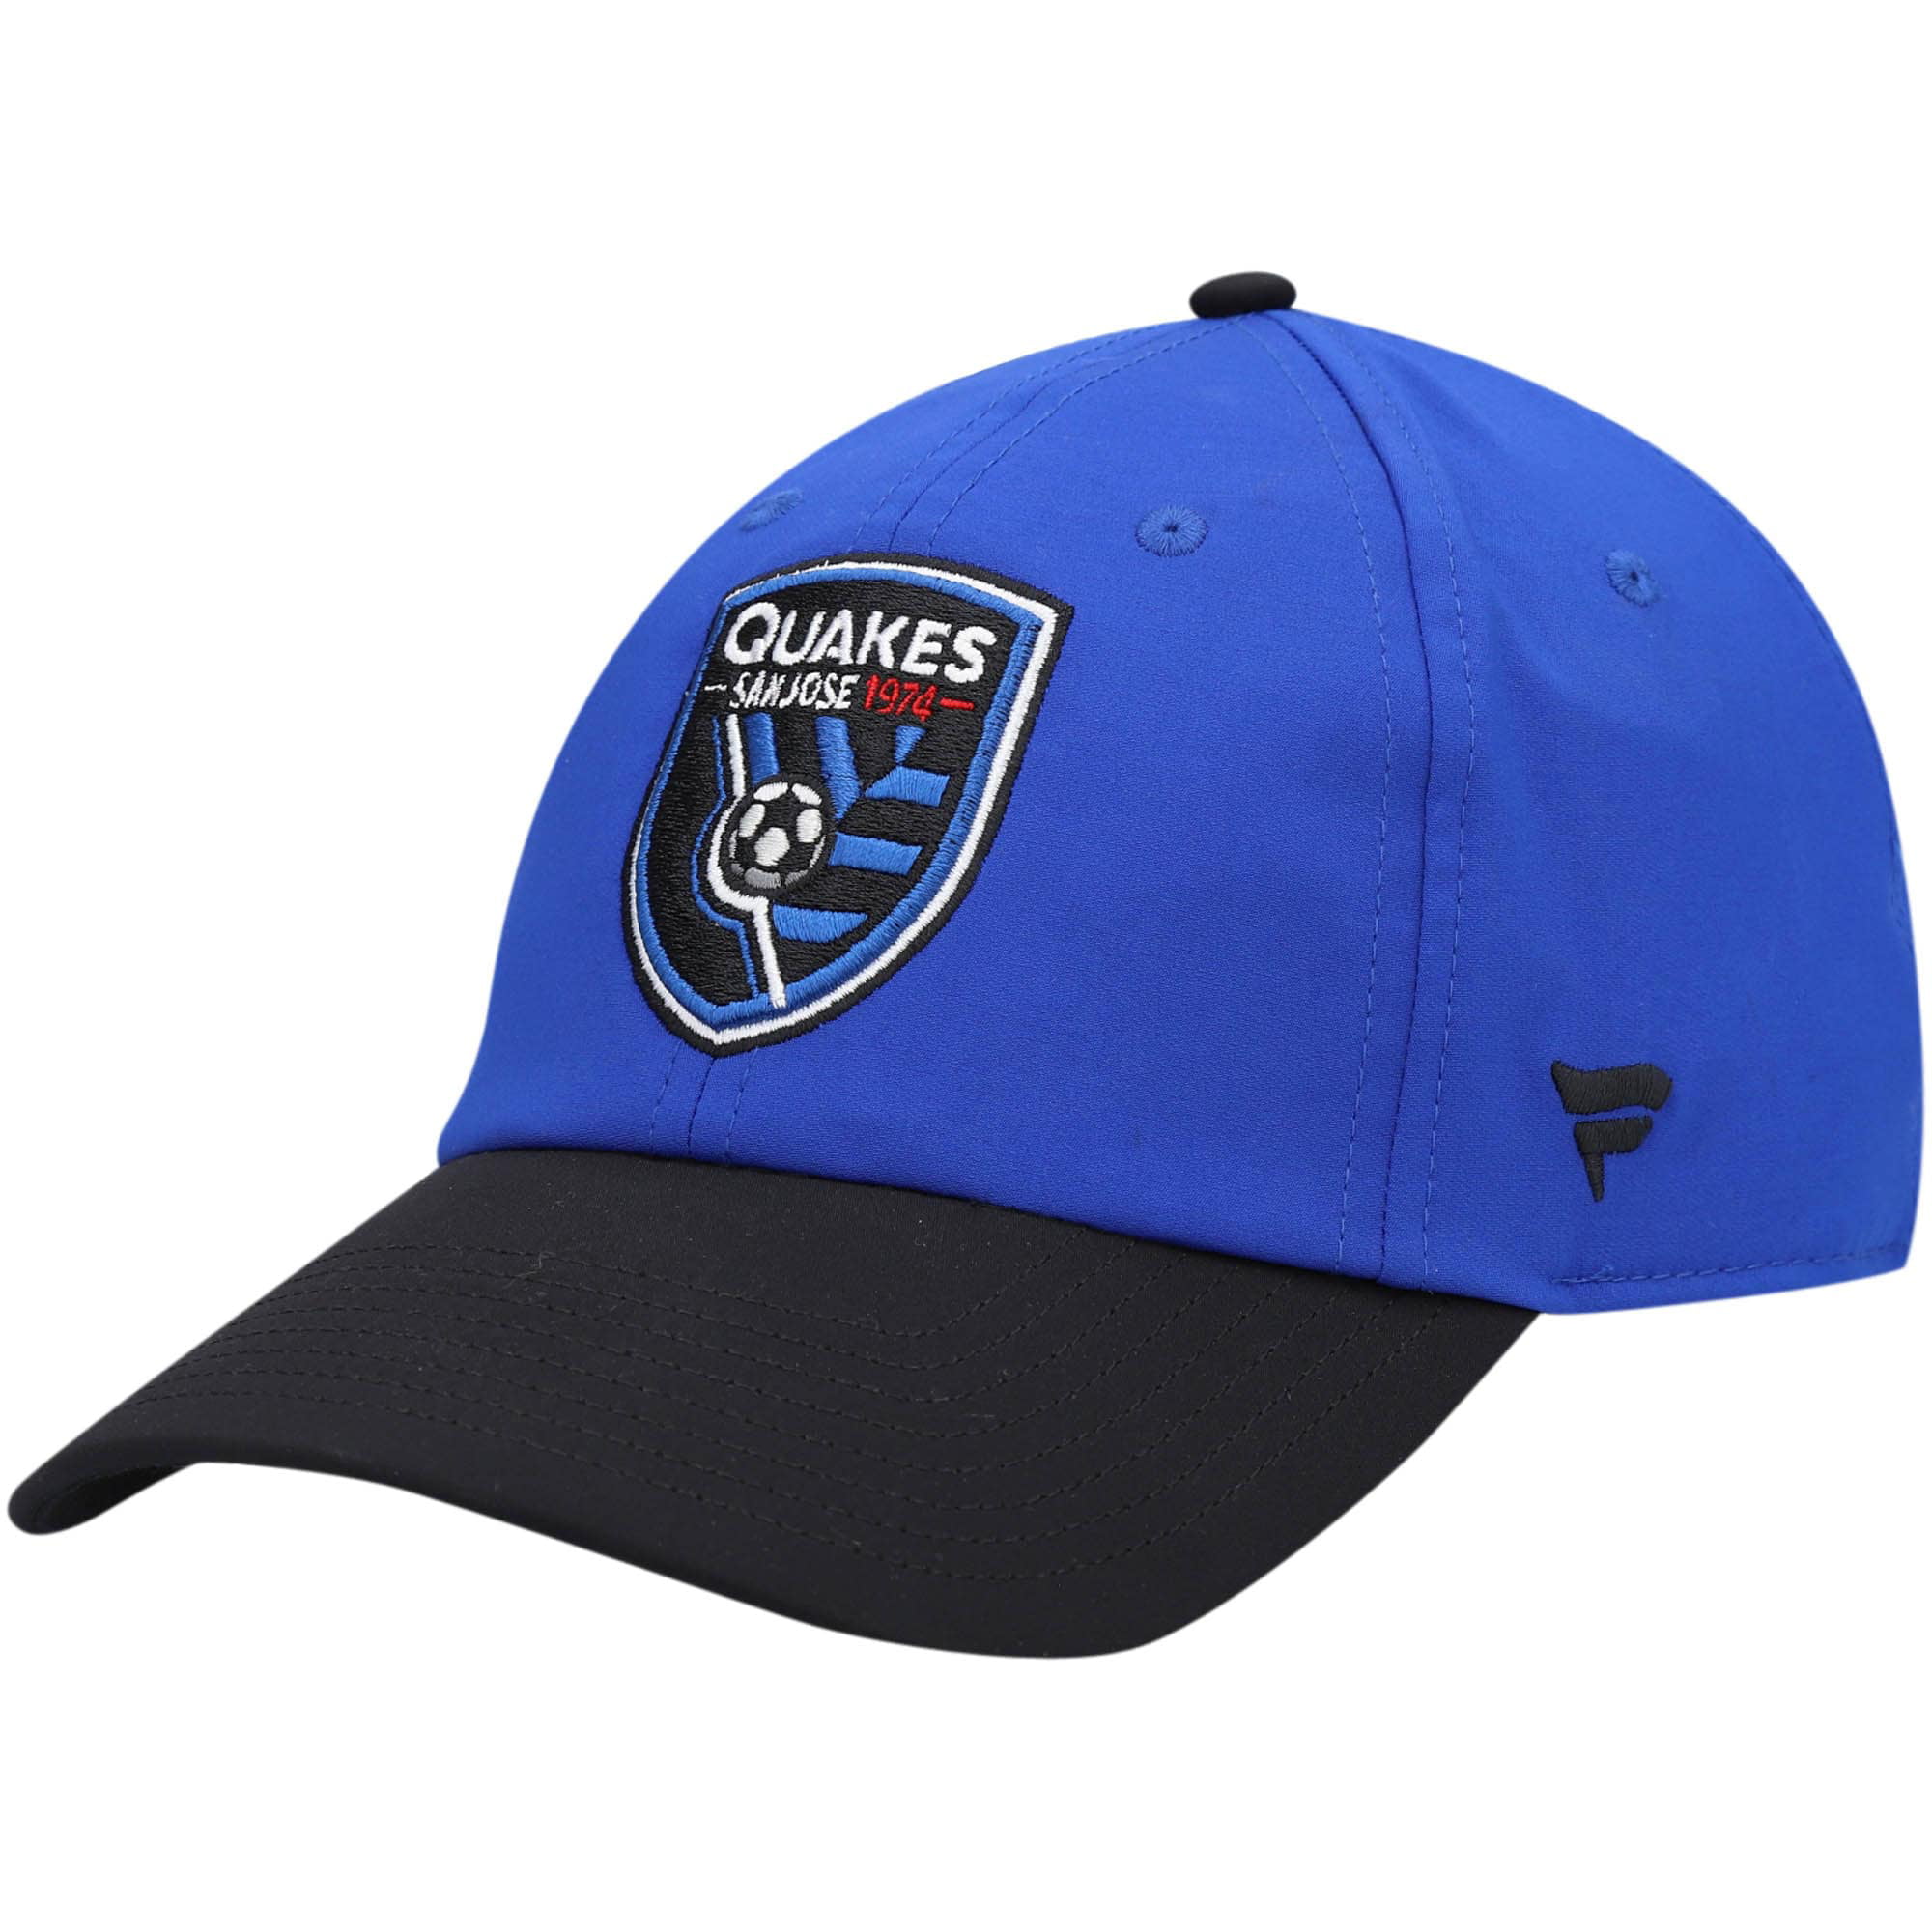 MLS Official San Jose Earthquakes Toddler Size Hat One Size Fits Most New 